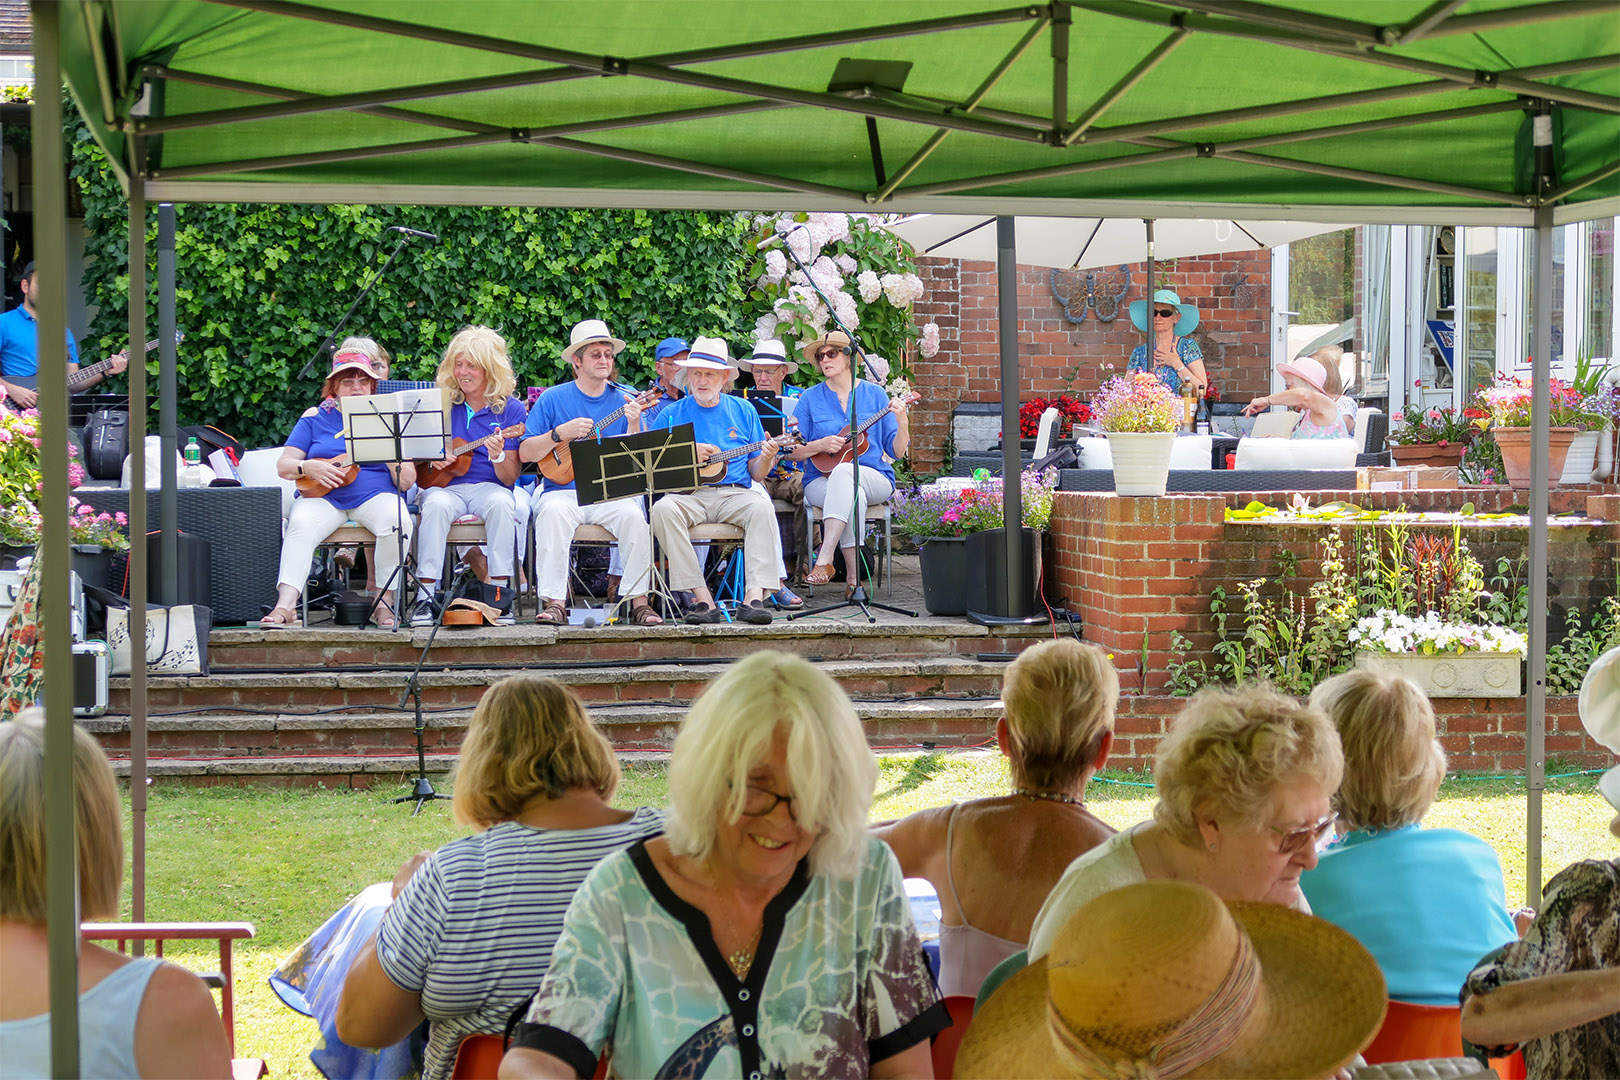 Views of the Charity Garden Party 2019